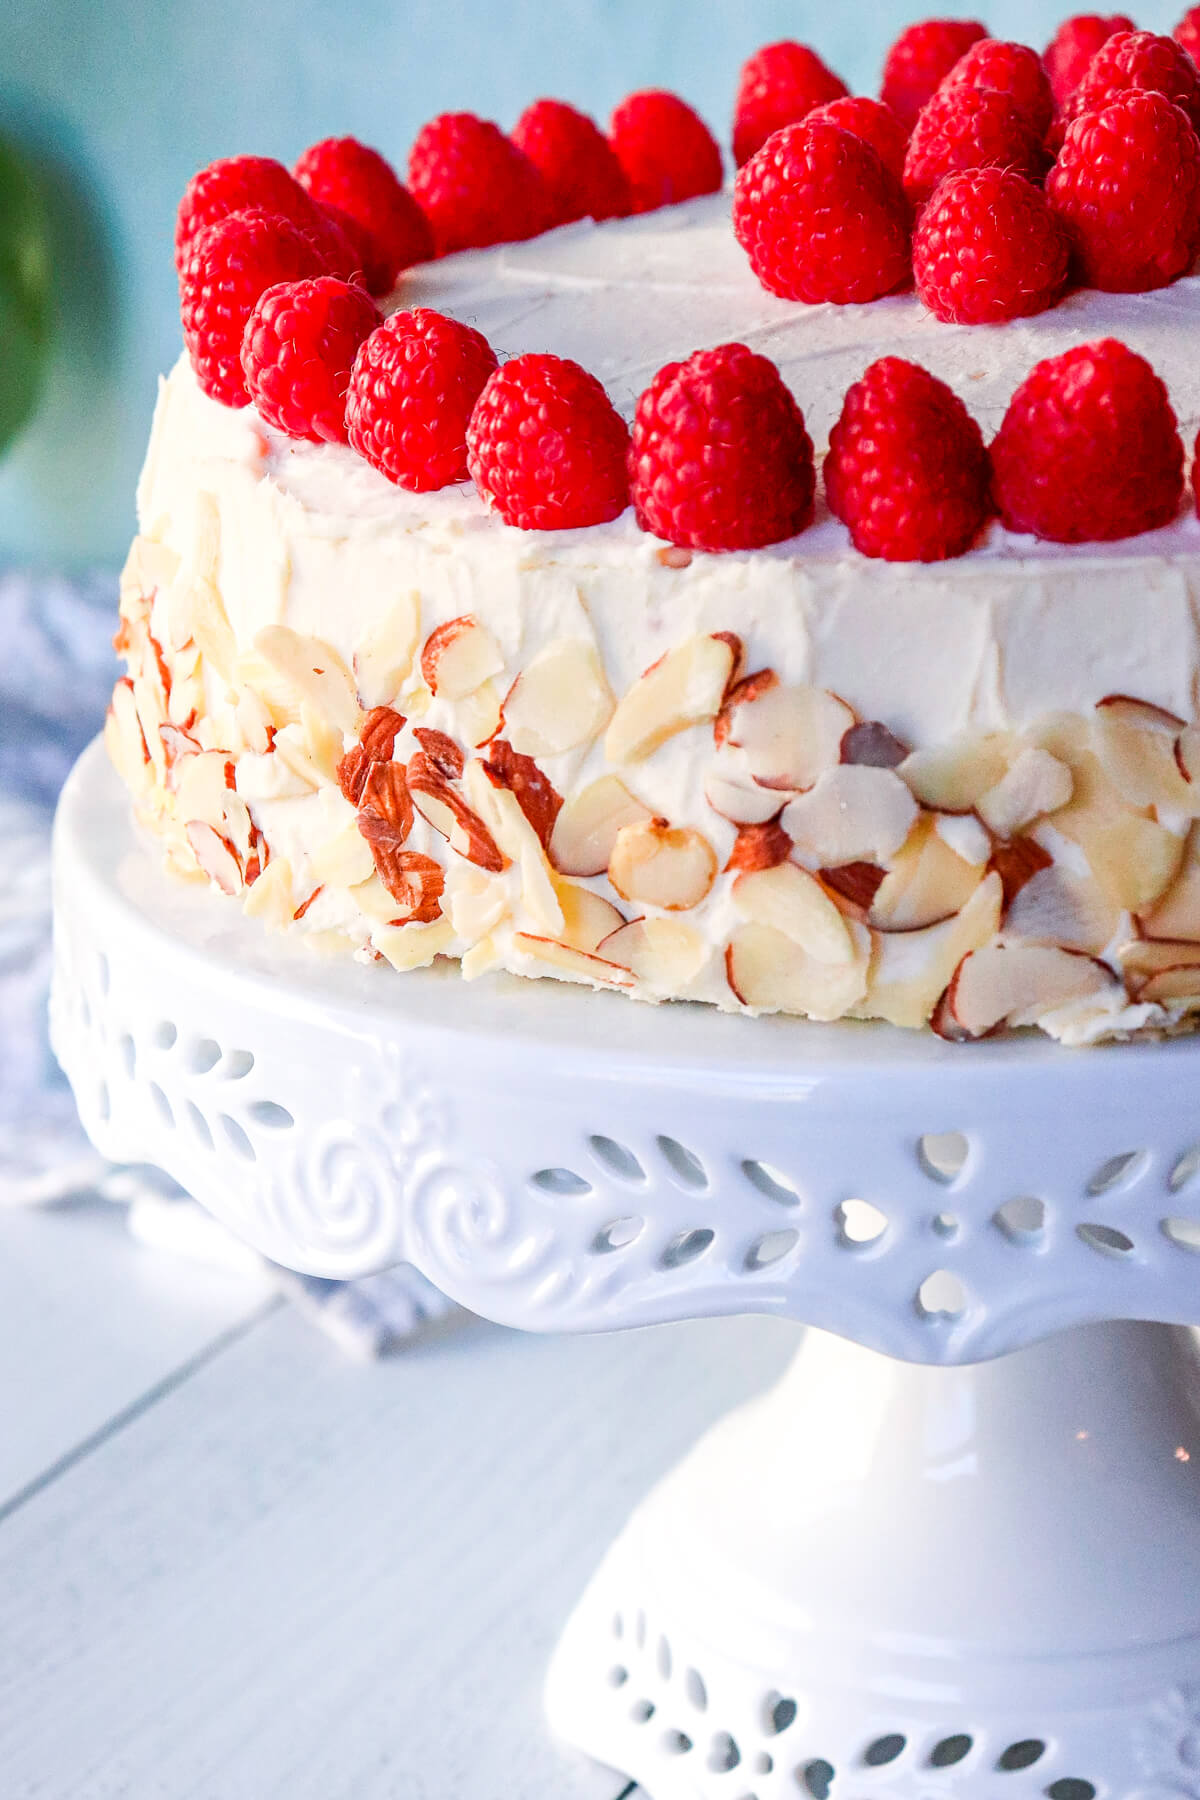 Side view of the keto almond raspberry cake on a white pedestal, decorated with fresh raspberries and almonds